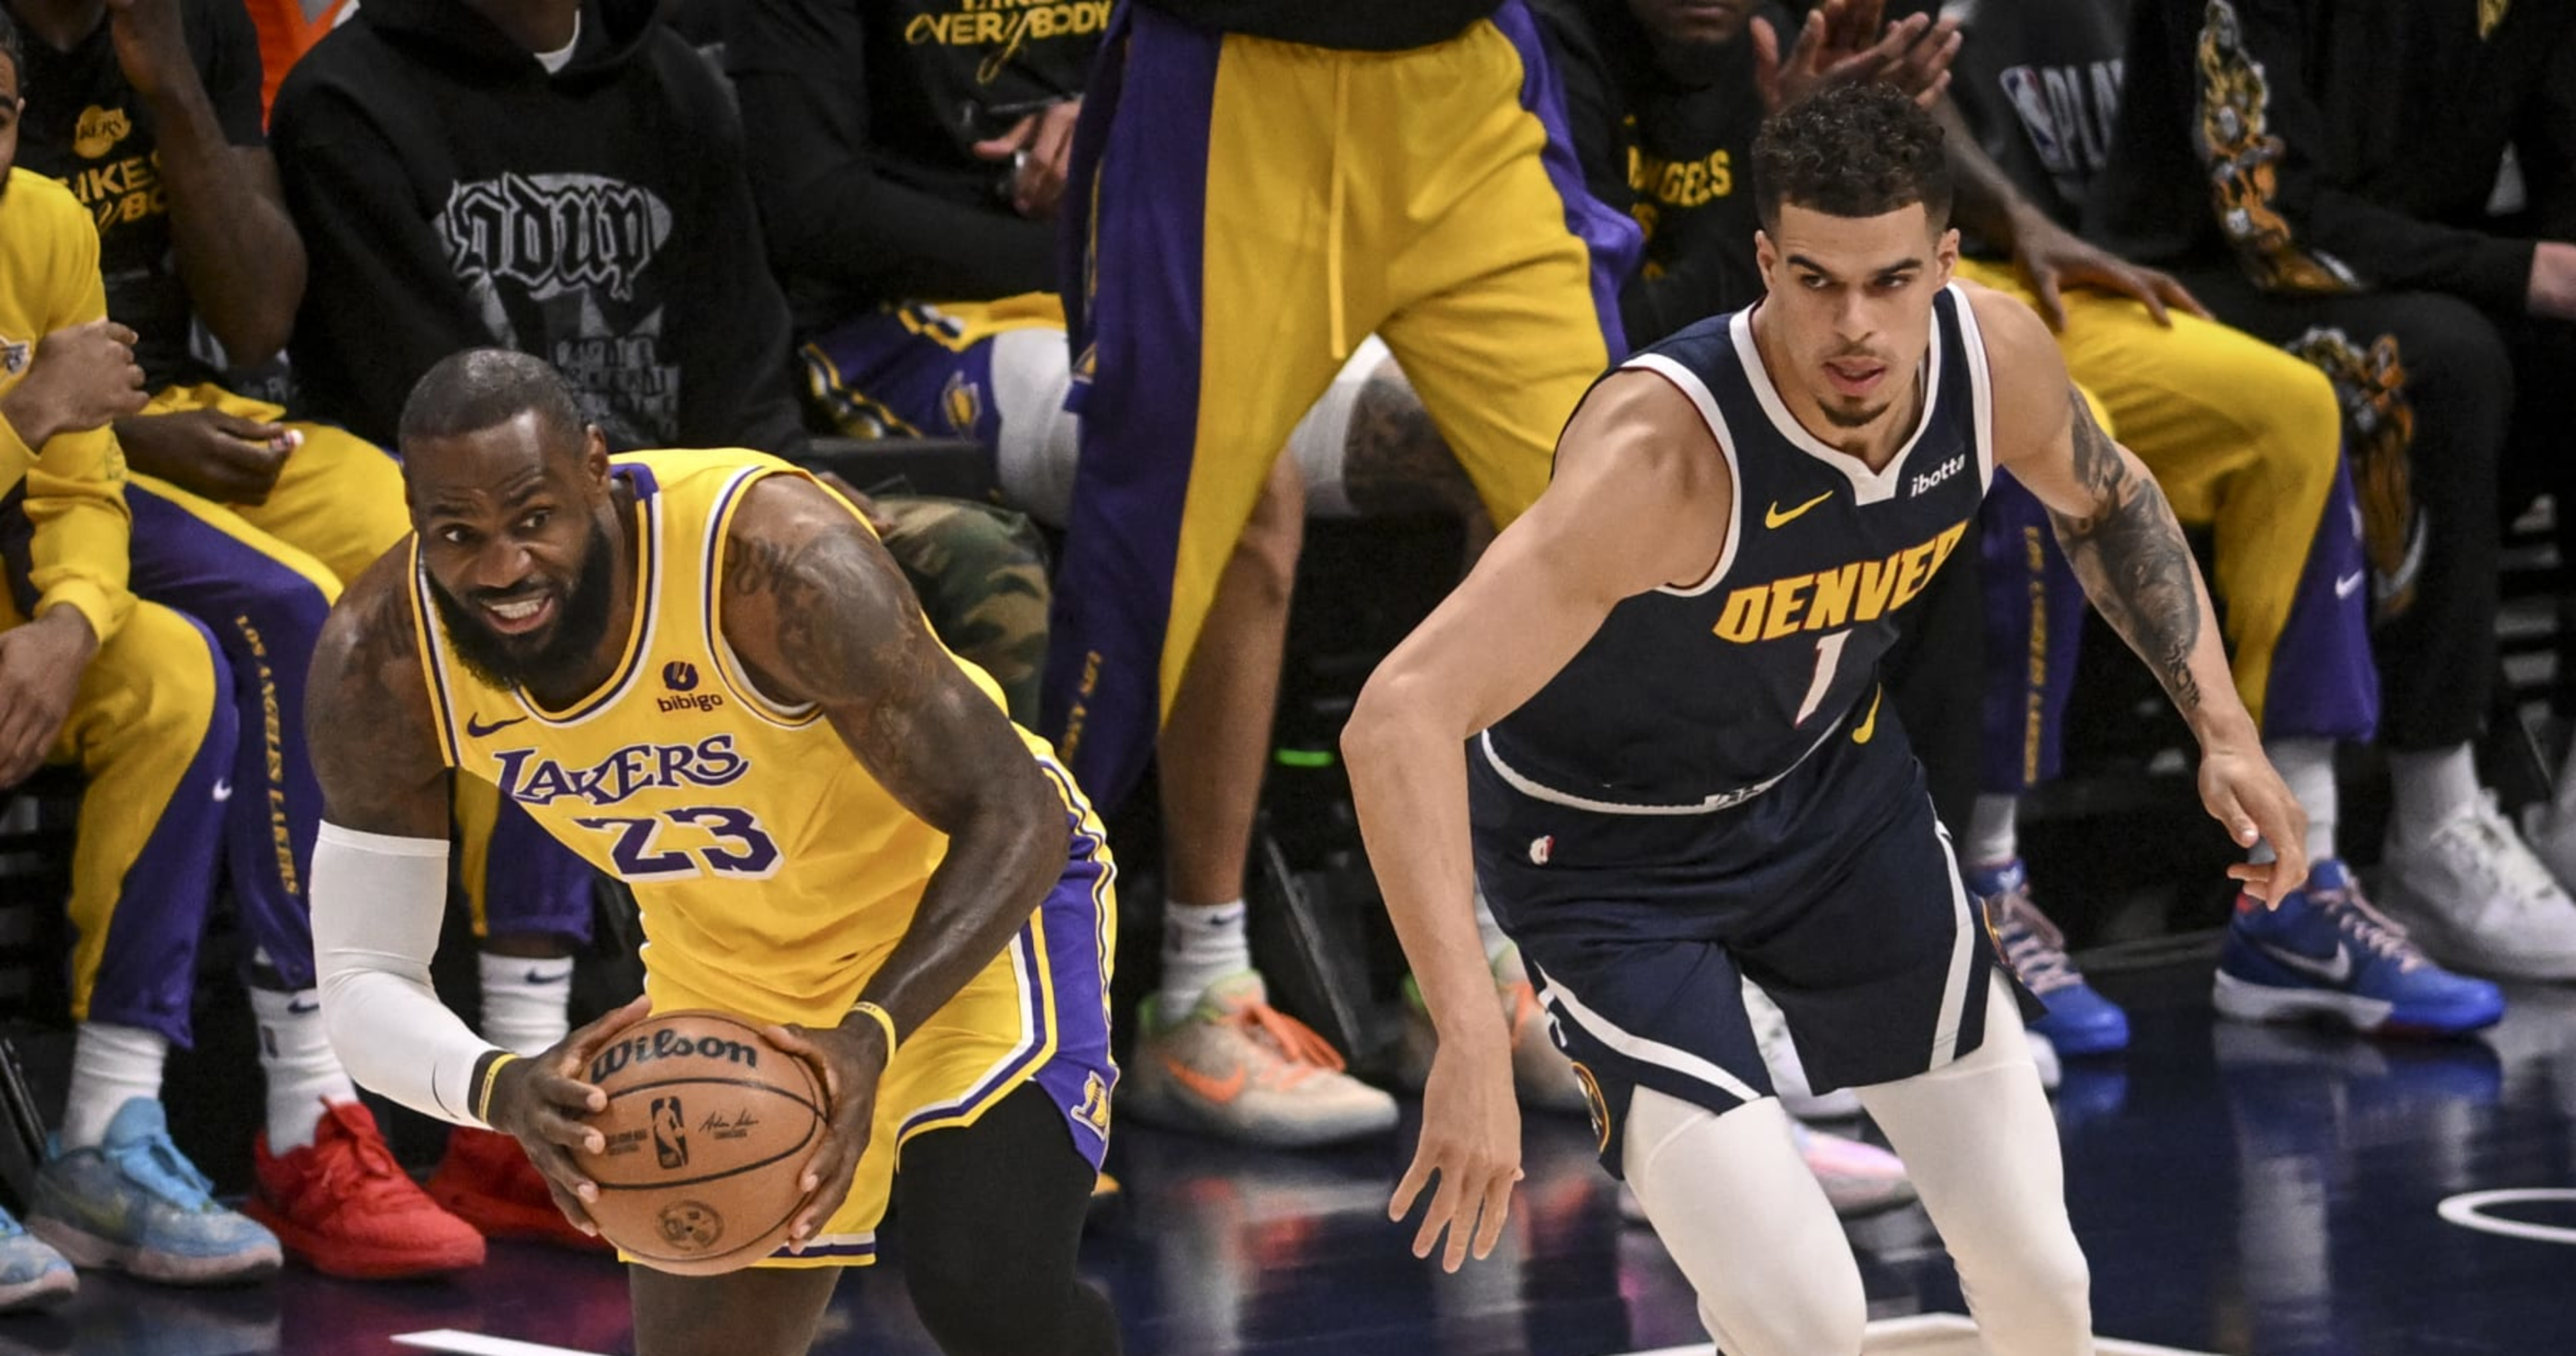 Lakers' LeBron James: Nuggets' Michael Porter Jr. 'Kicked Our Ass' in NBA Playoffs